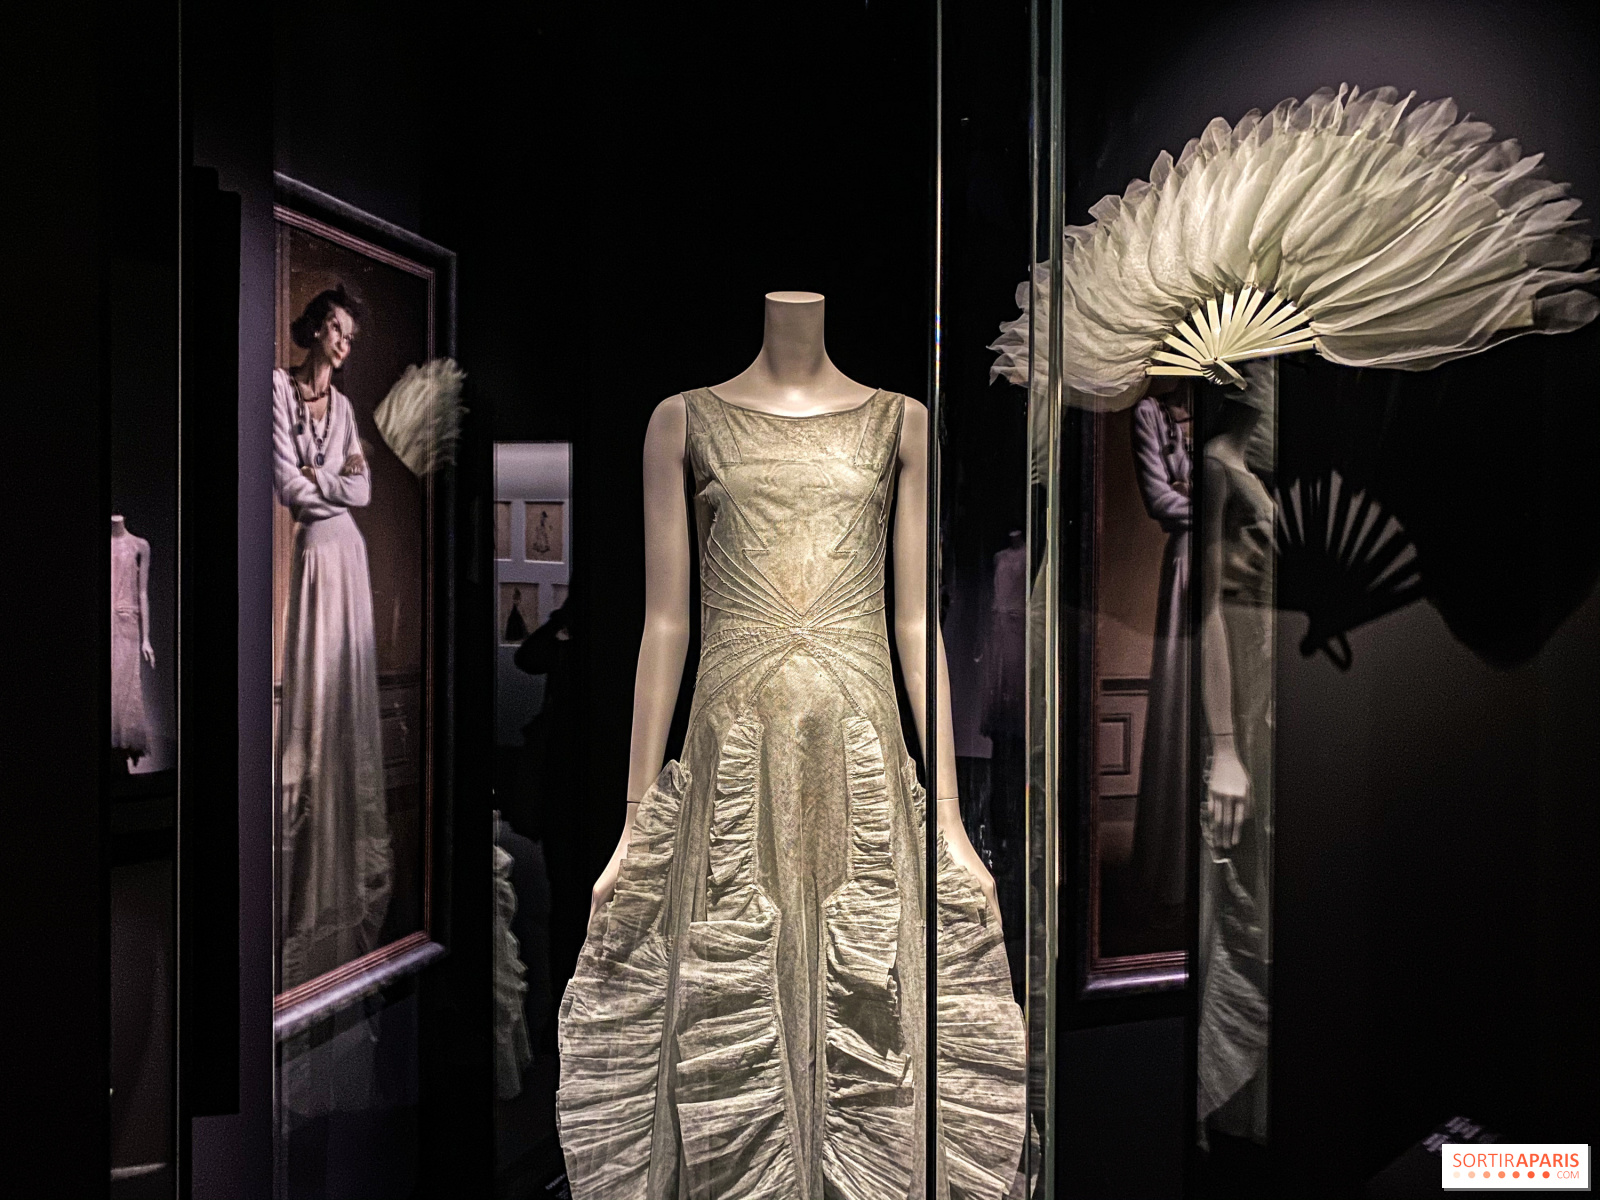 Gabrielle Chanel exhibition at the Palais Galliera, last days 